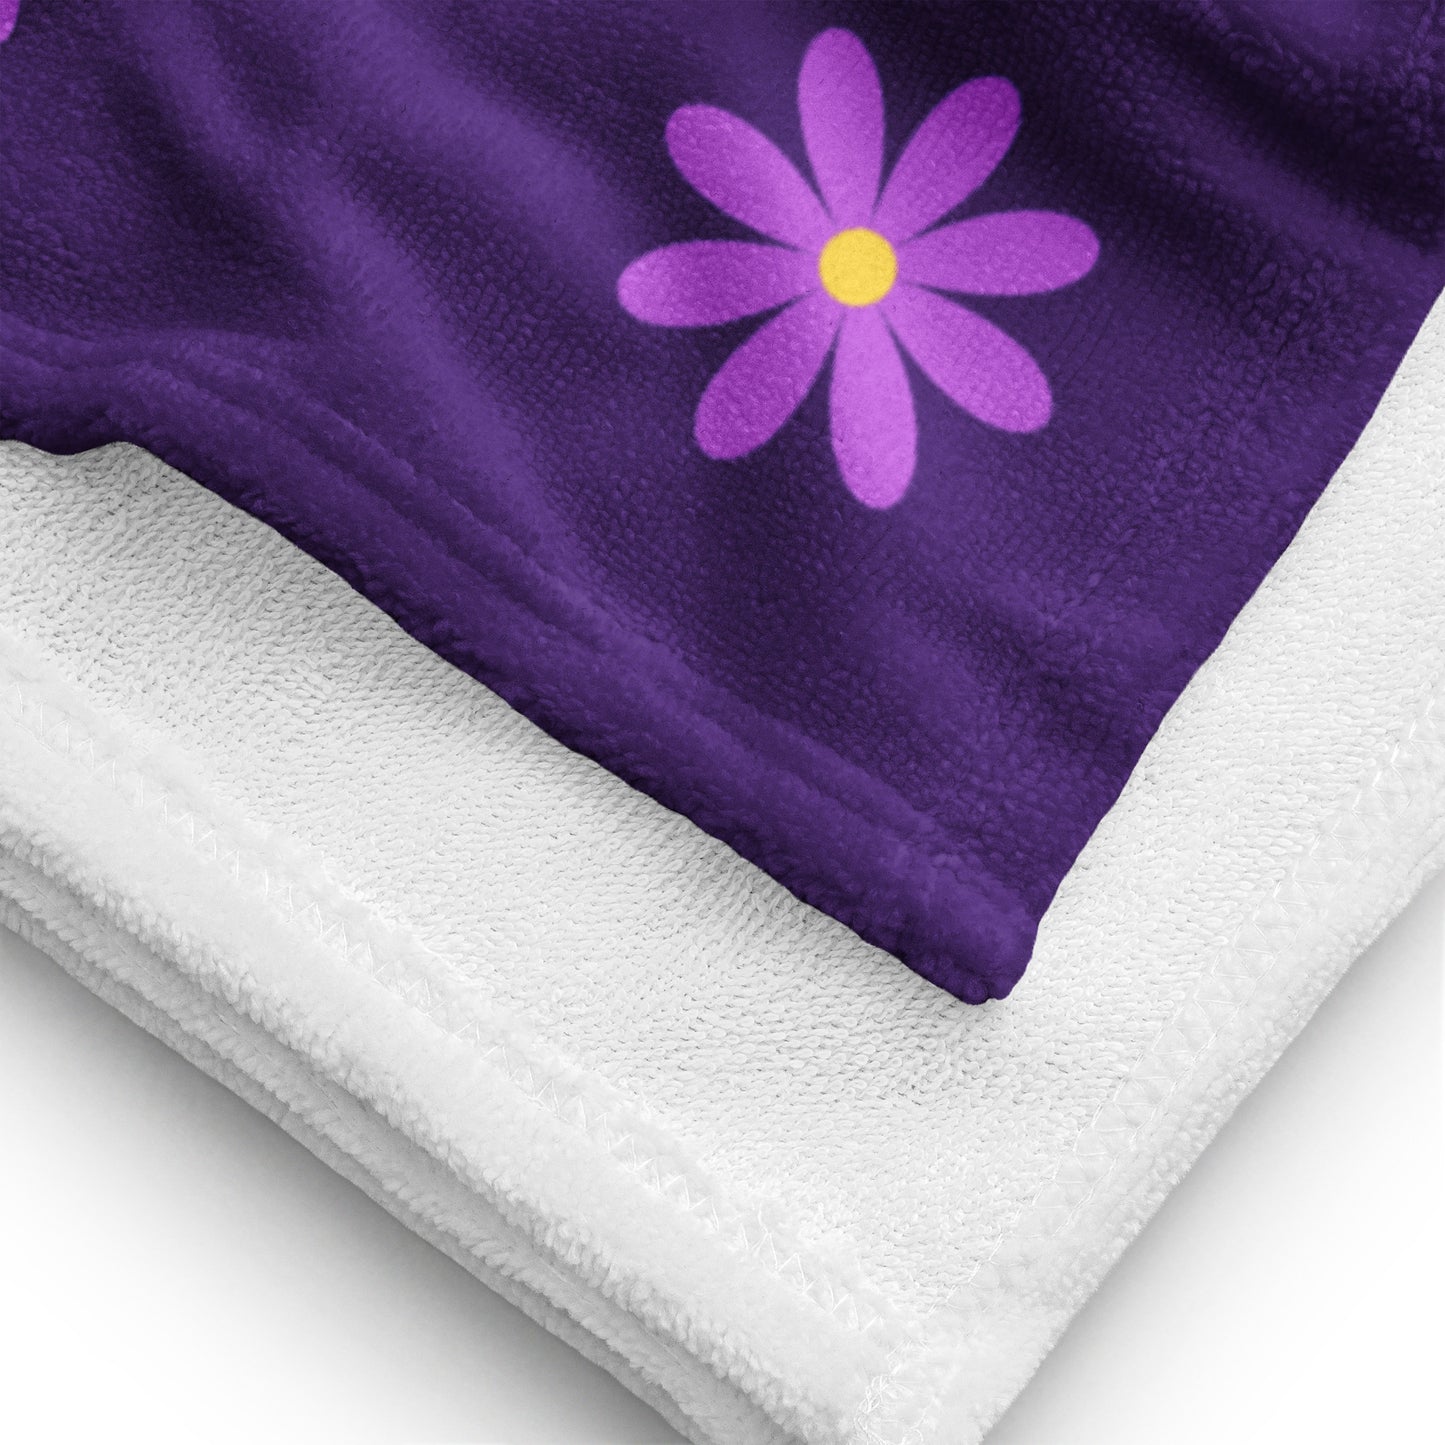 a towel with a purple flower on it